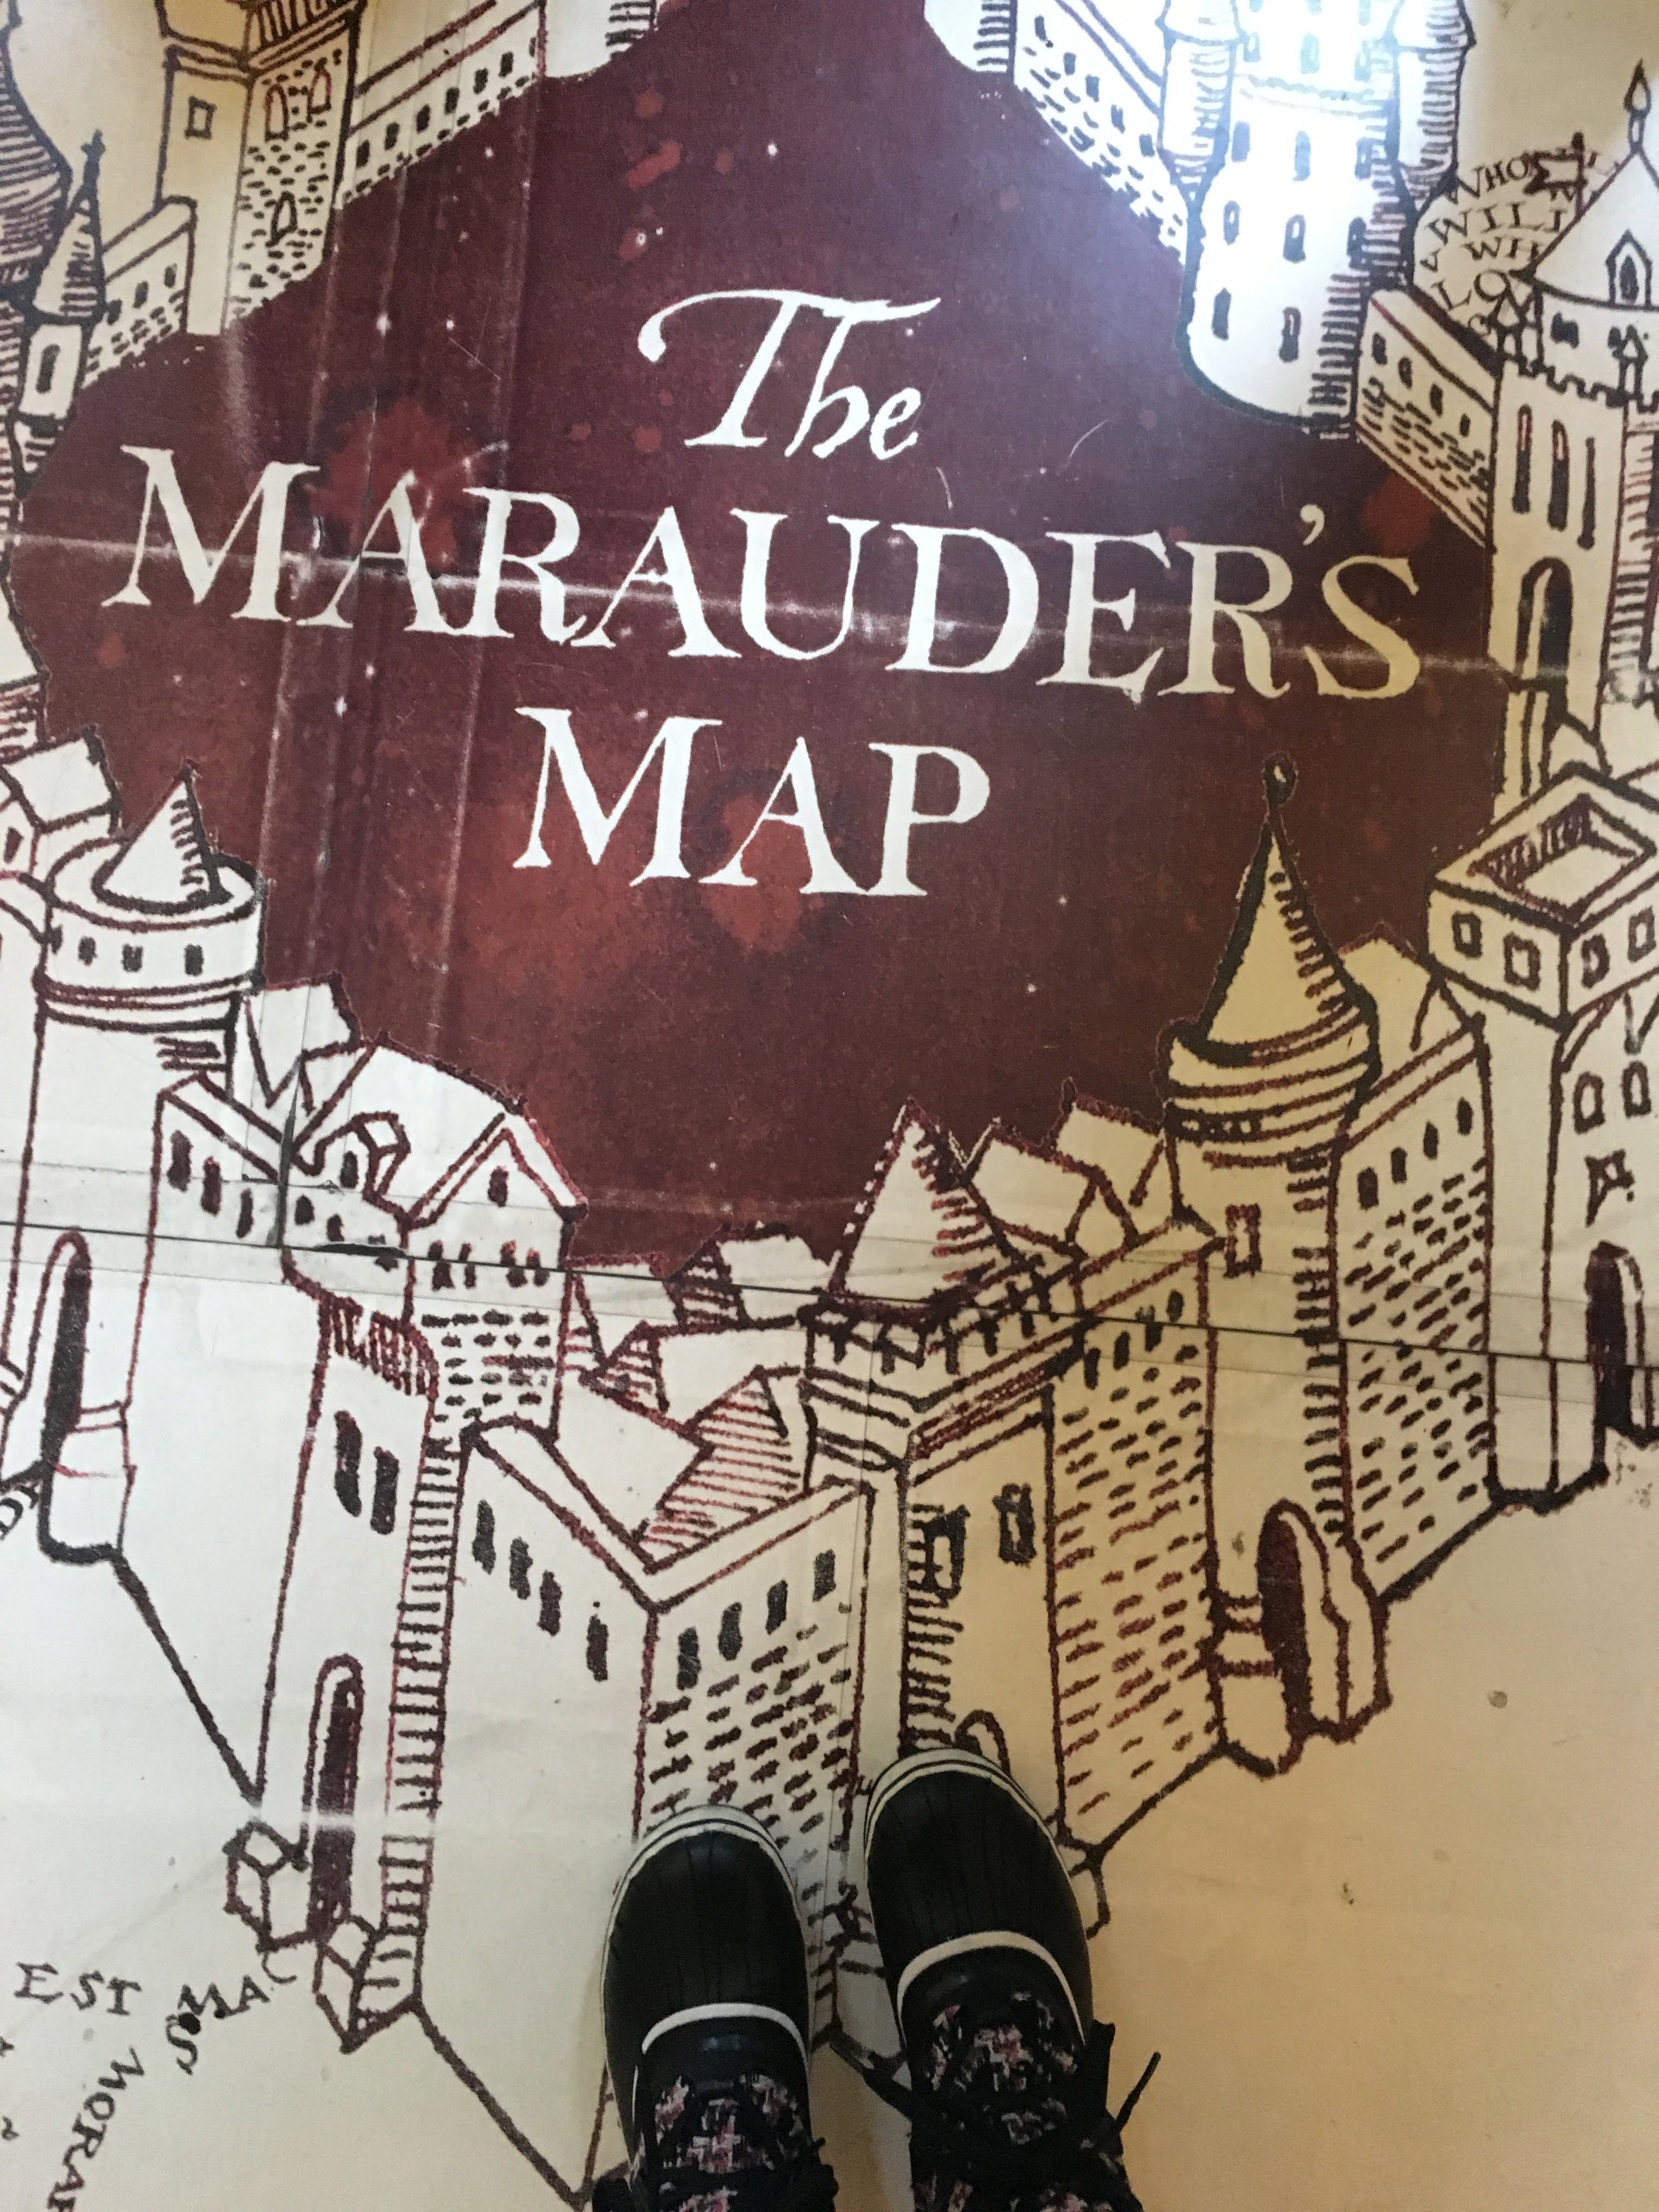 Standing on the Marauder's Map